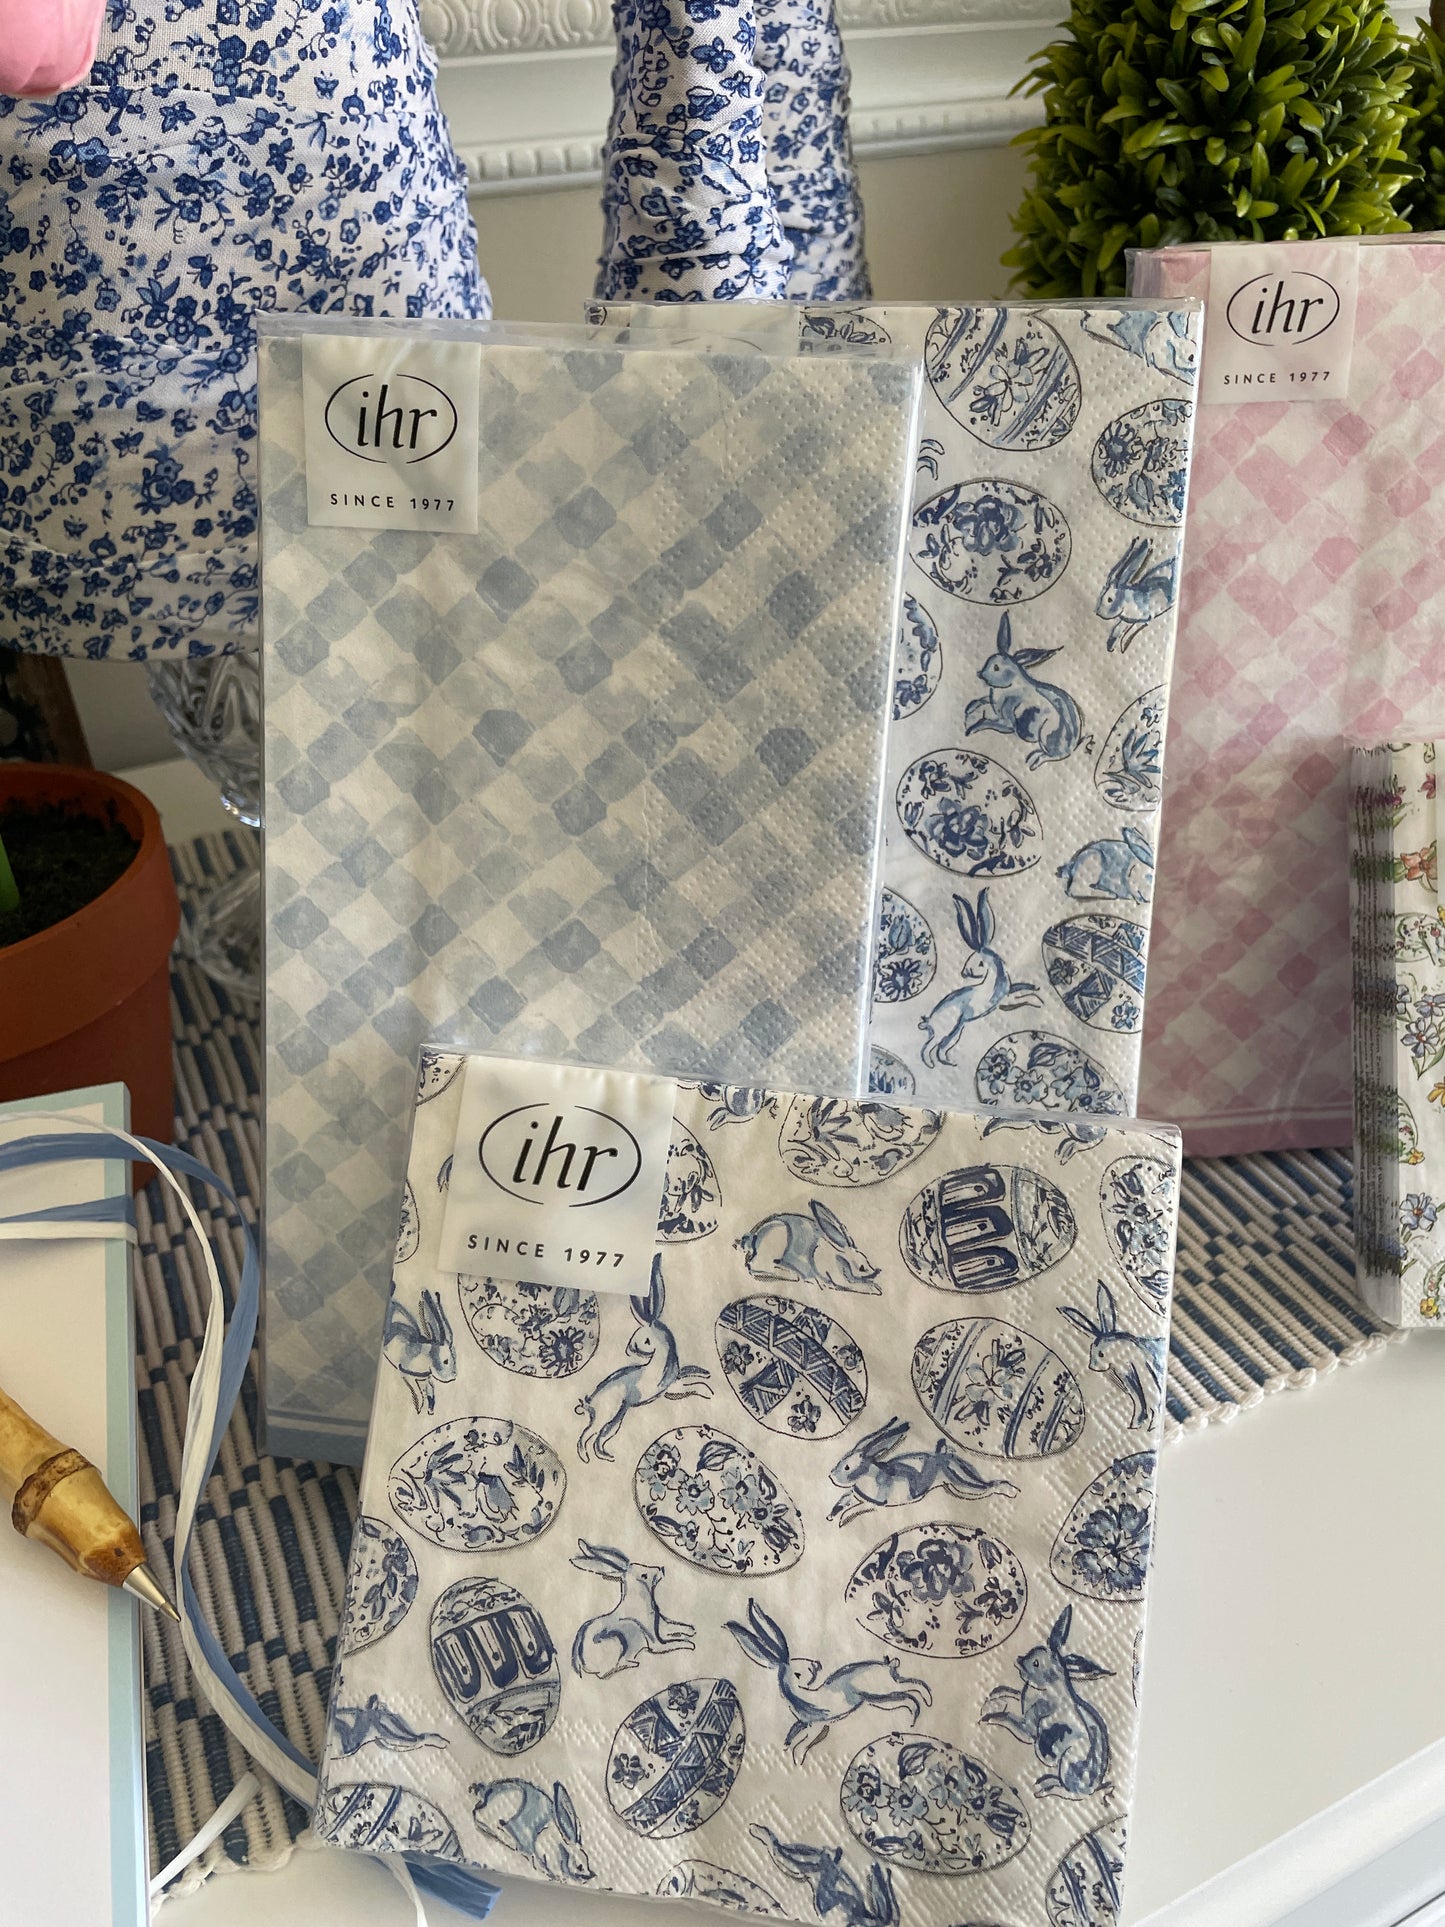 Blue And White Eggs With Bunnies, Cocktail Napkins